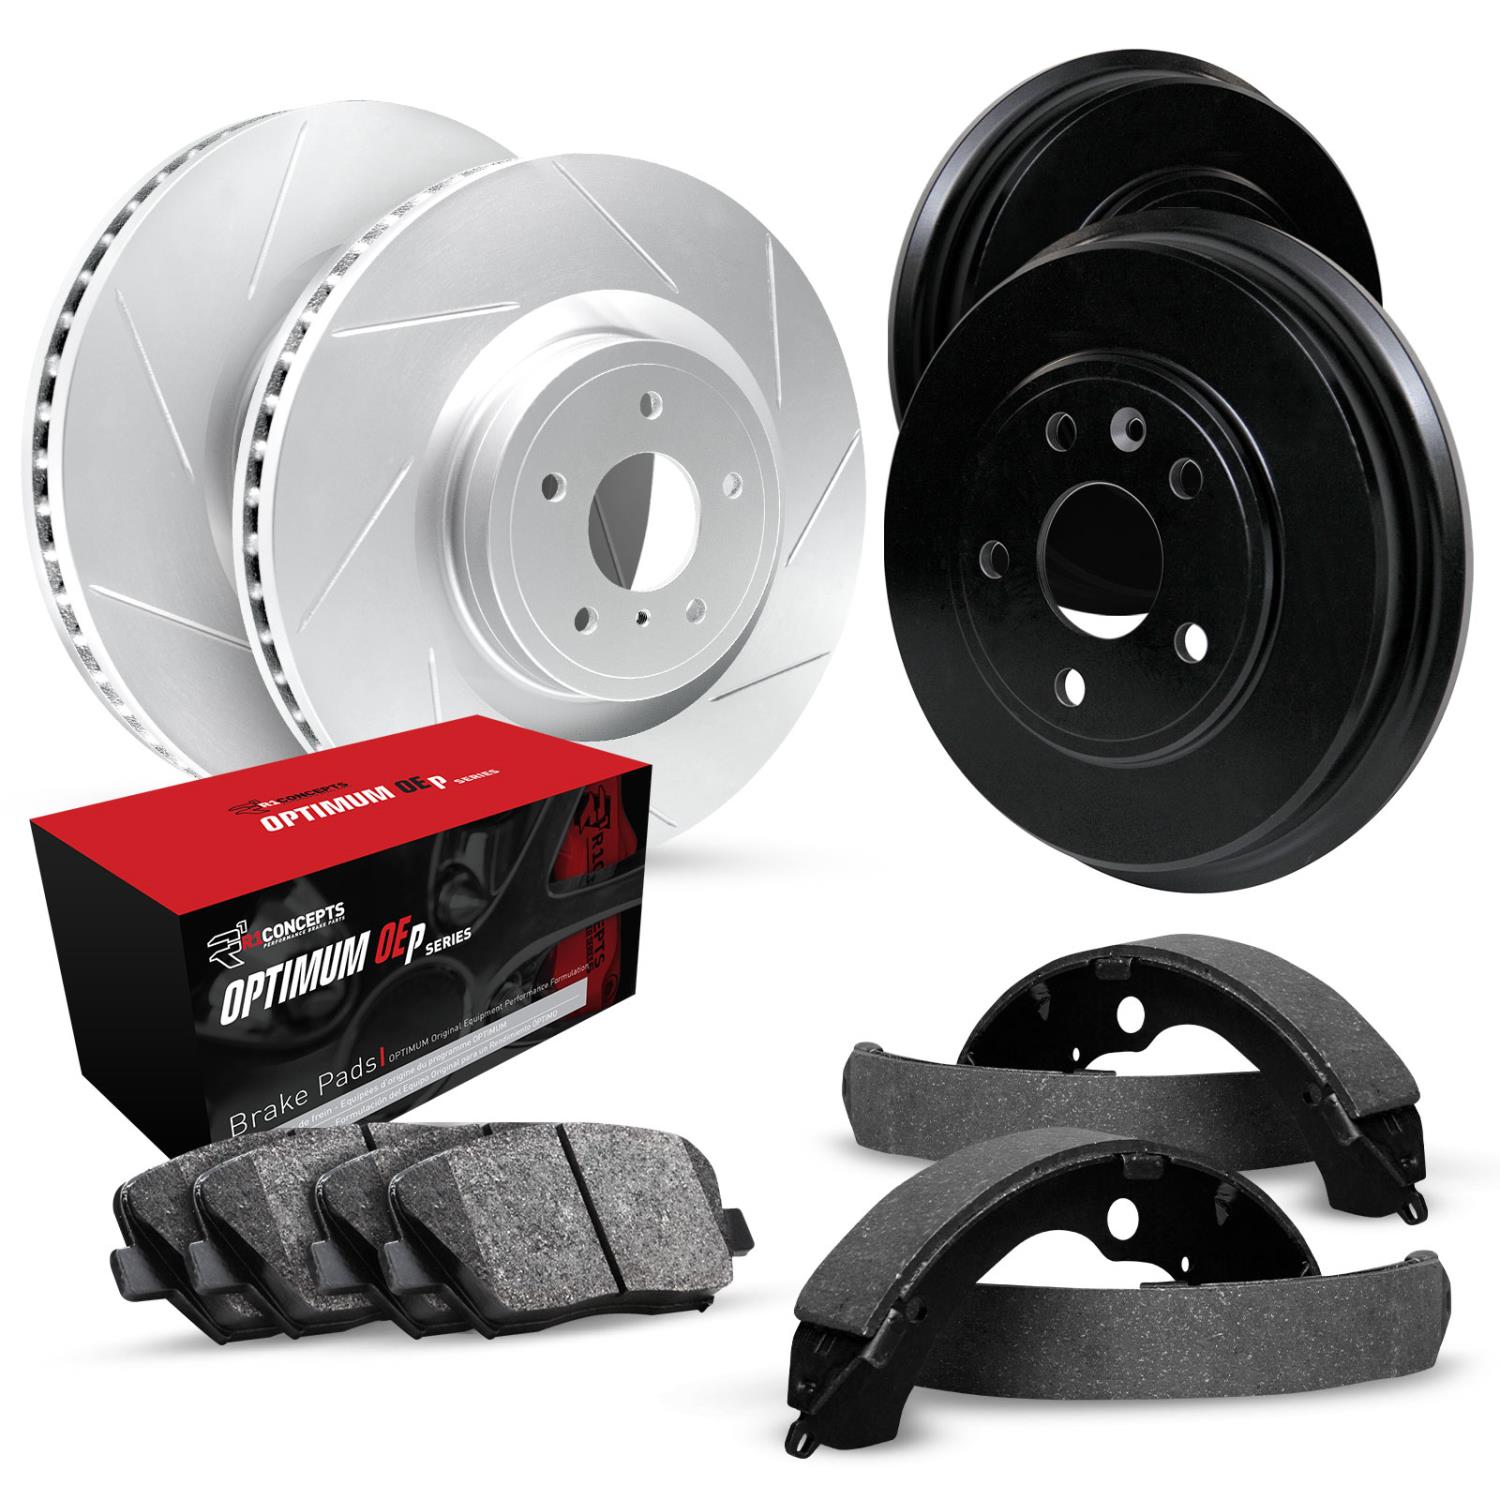 GEO-Carbon Slotted Brake Rotor & Drum Set w/Optimum OE Pads & Shoes, 1993-1997 Ford/Lincoln/Mercury/Mazda